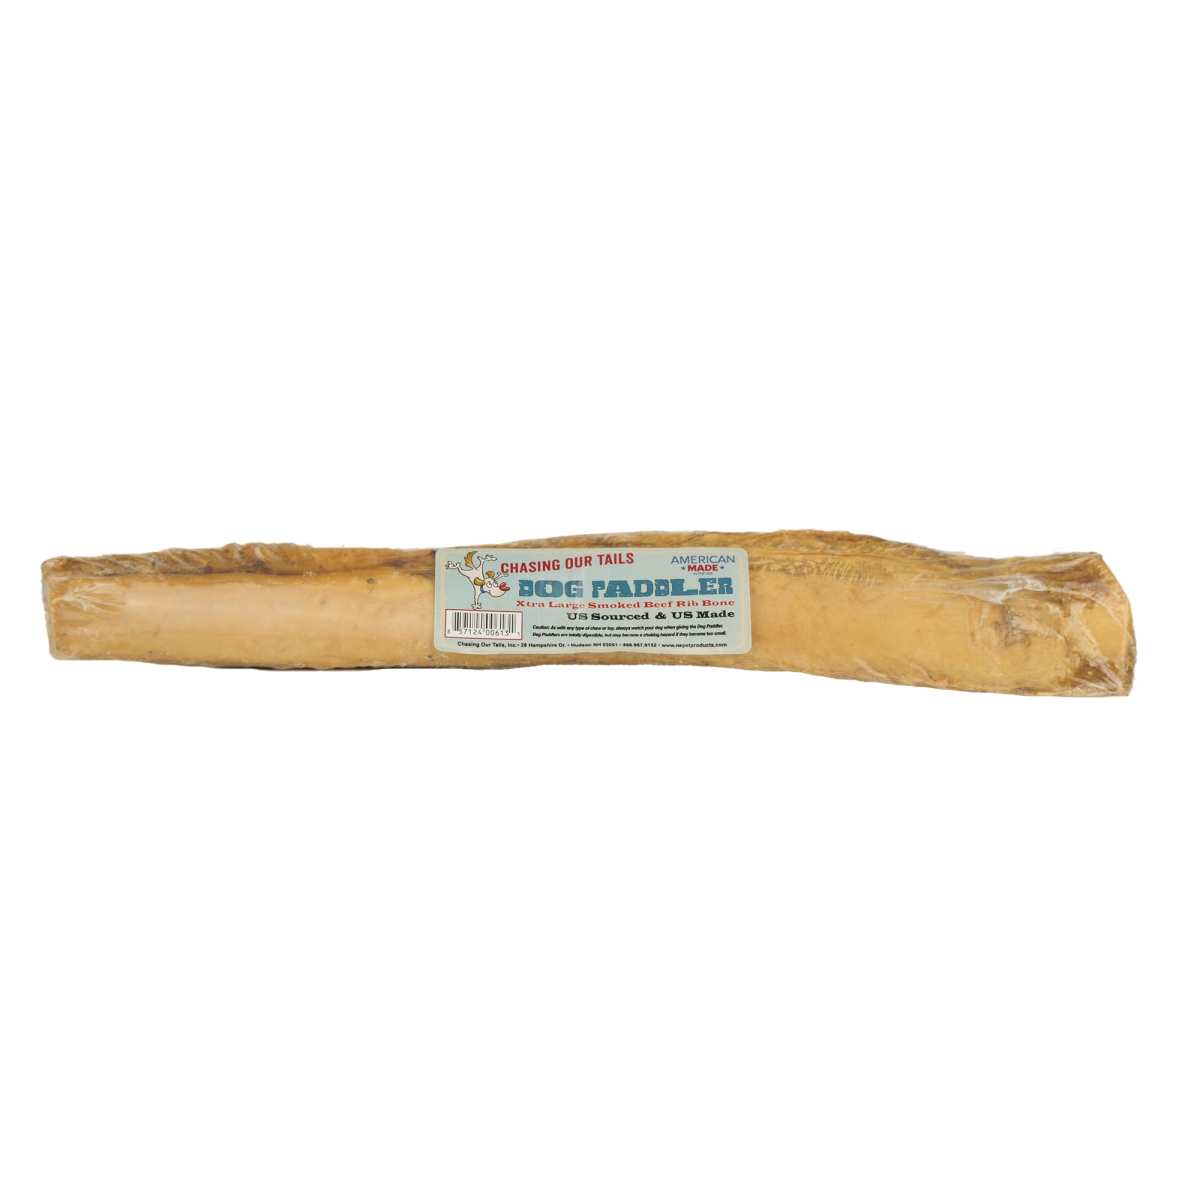 Picture of Chasing Our Tails 857124006131 Dog Paddler Beef Rib Bone for Dogs